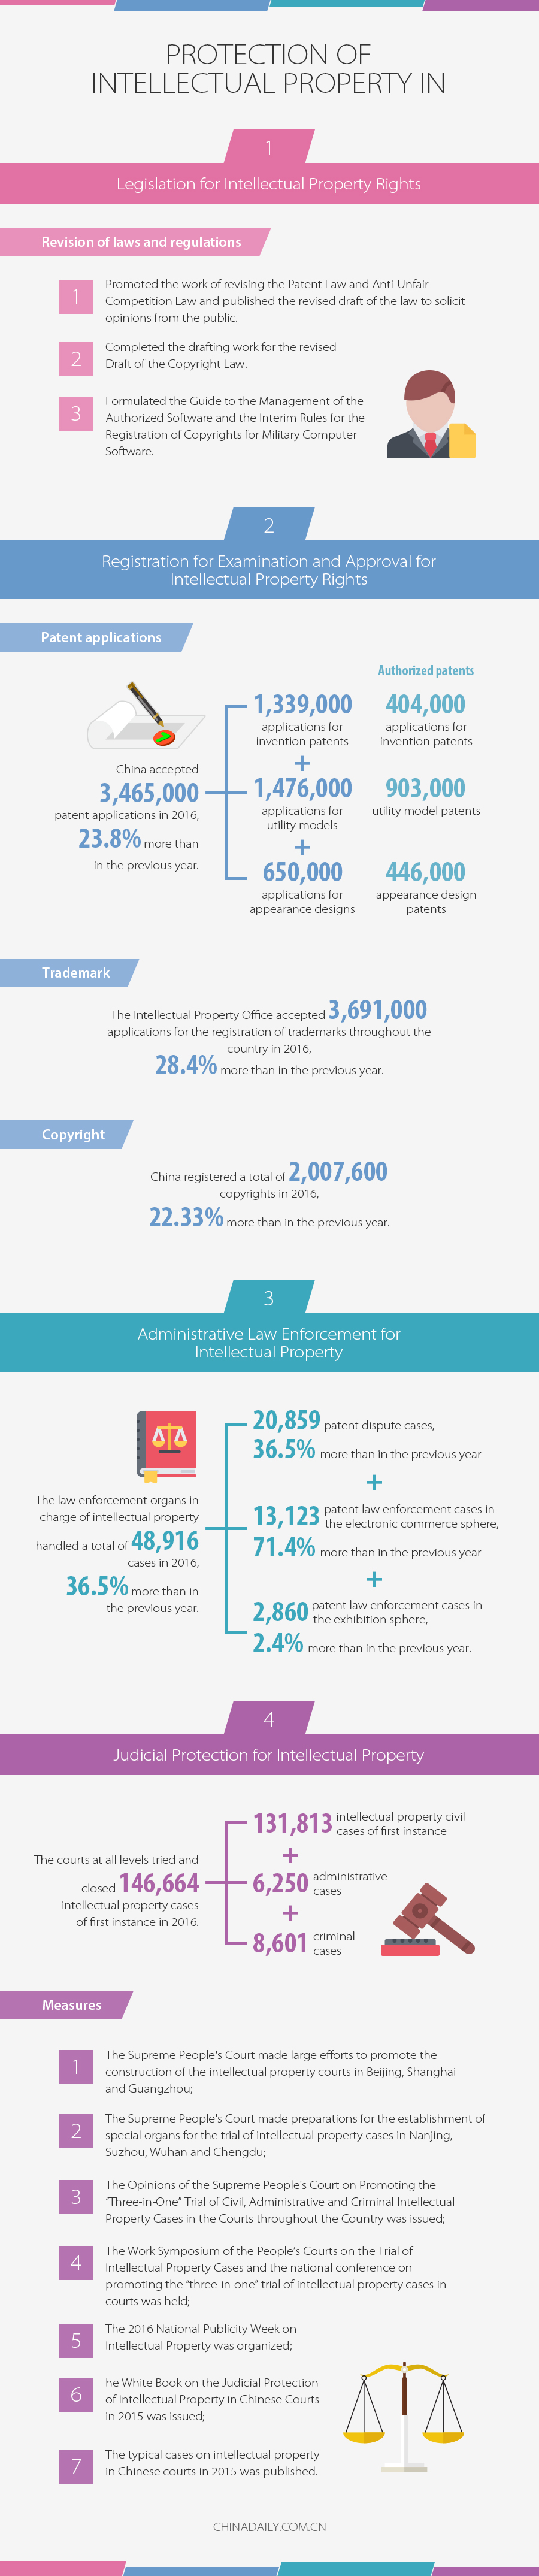 Protection of Intellectual Property in China.jpg